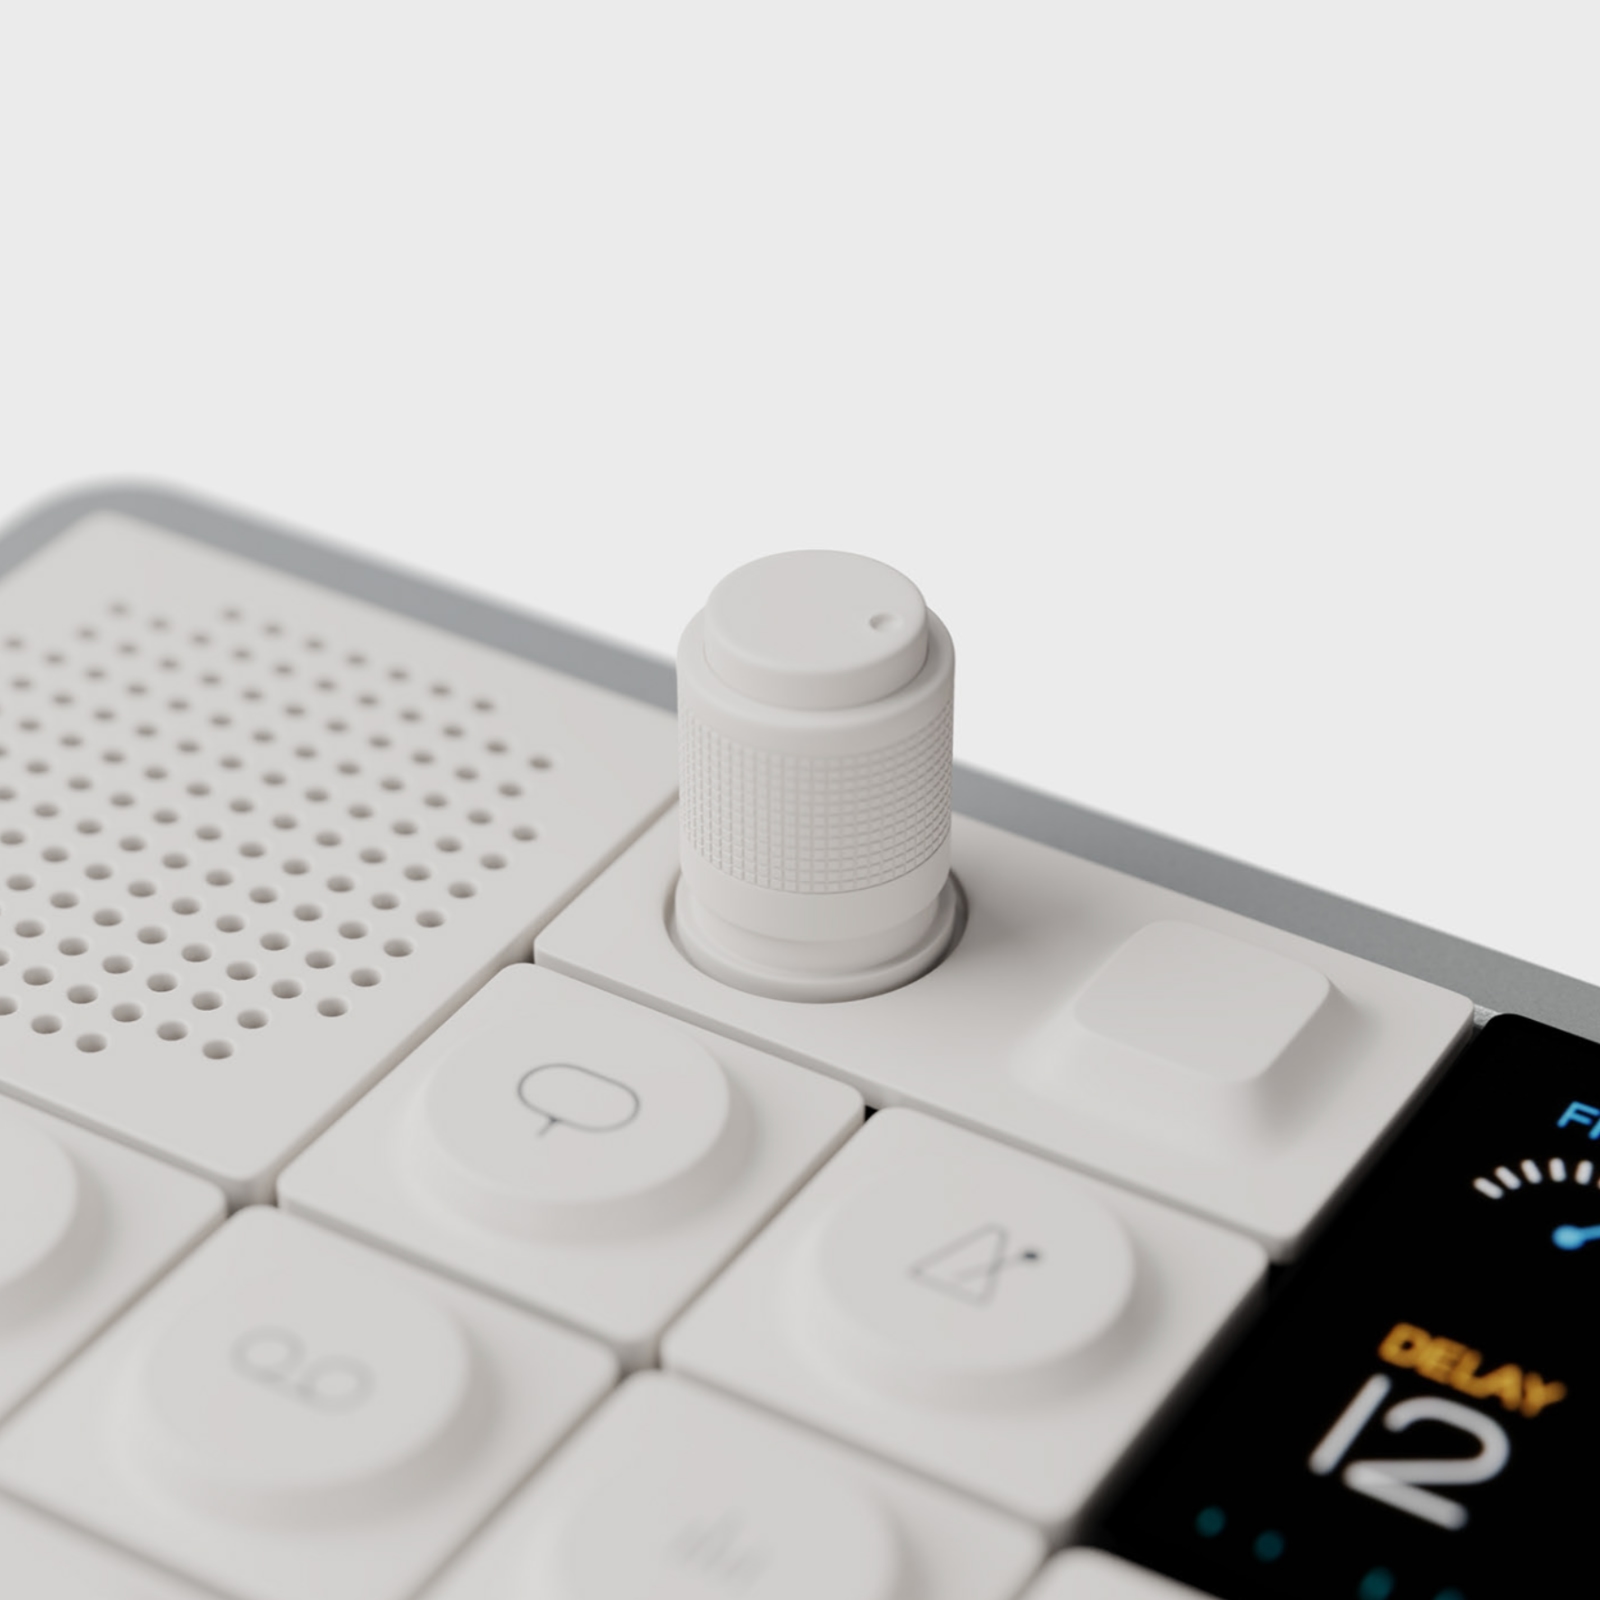 OP-1 Field brought to life: A stunning 3D design showcase by Hugo Barbosa in Blender